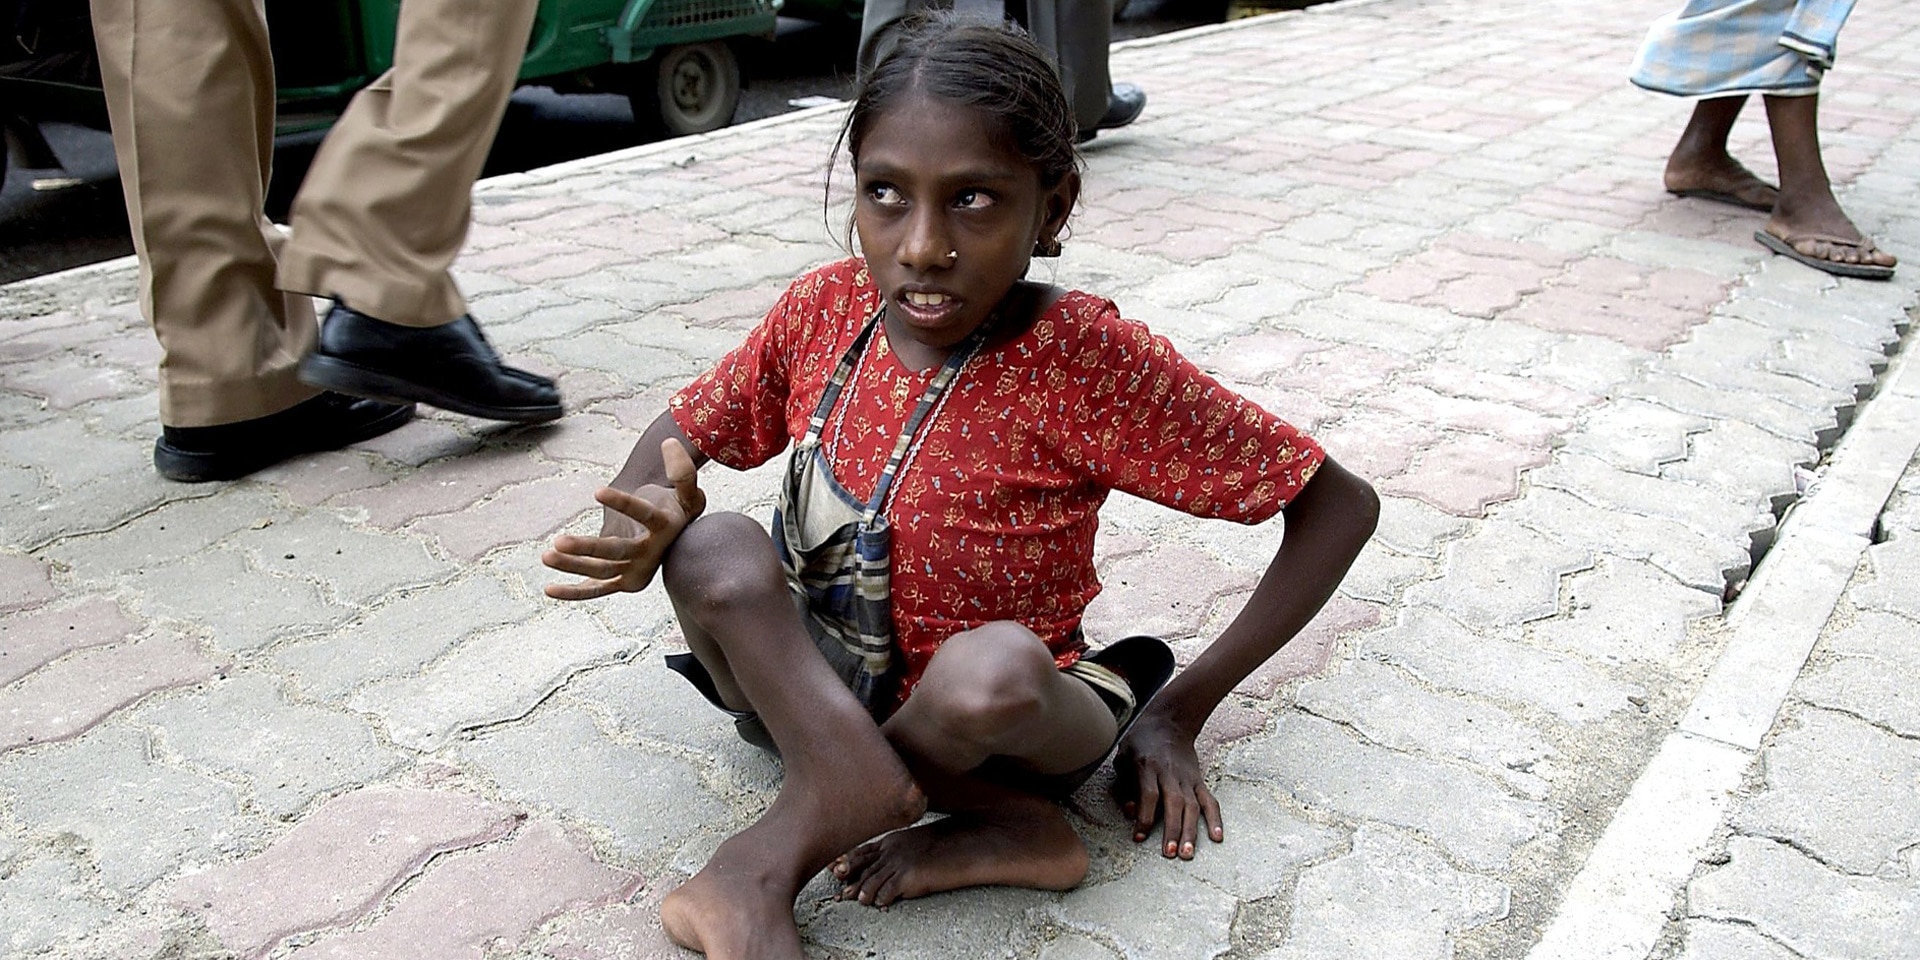 A Bangladeshi child with a physical disability sits on the ground.